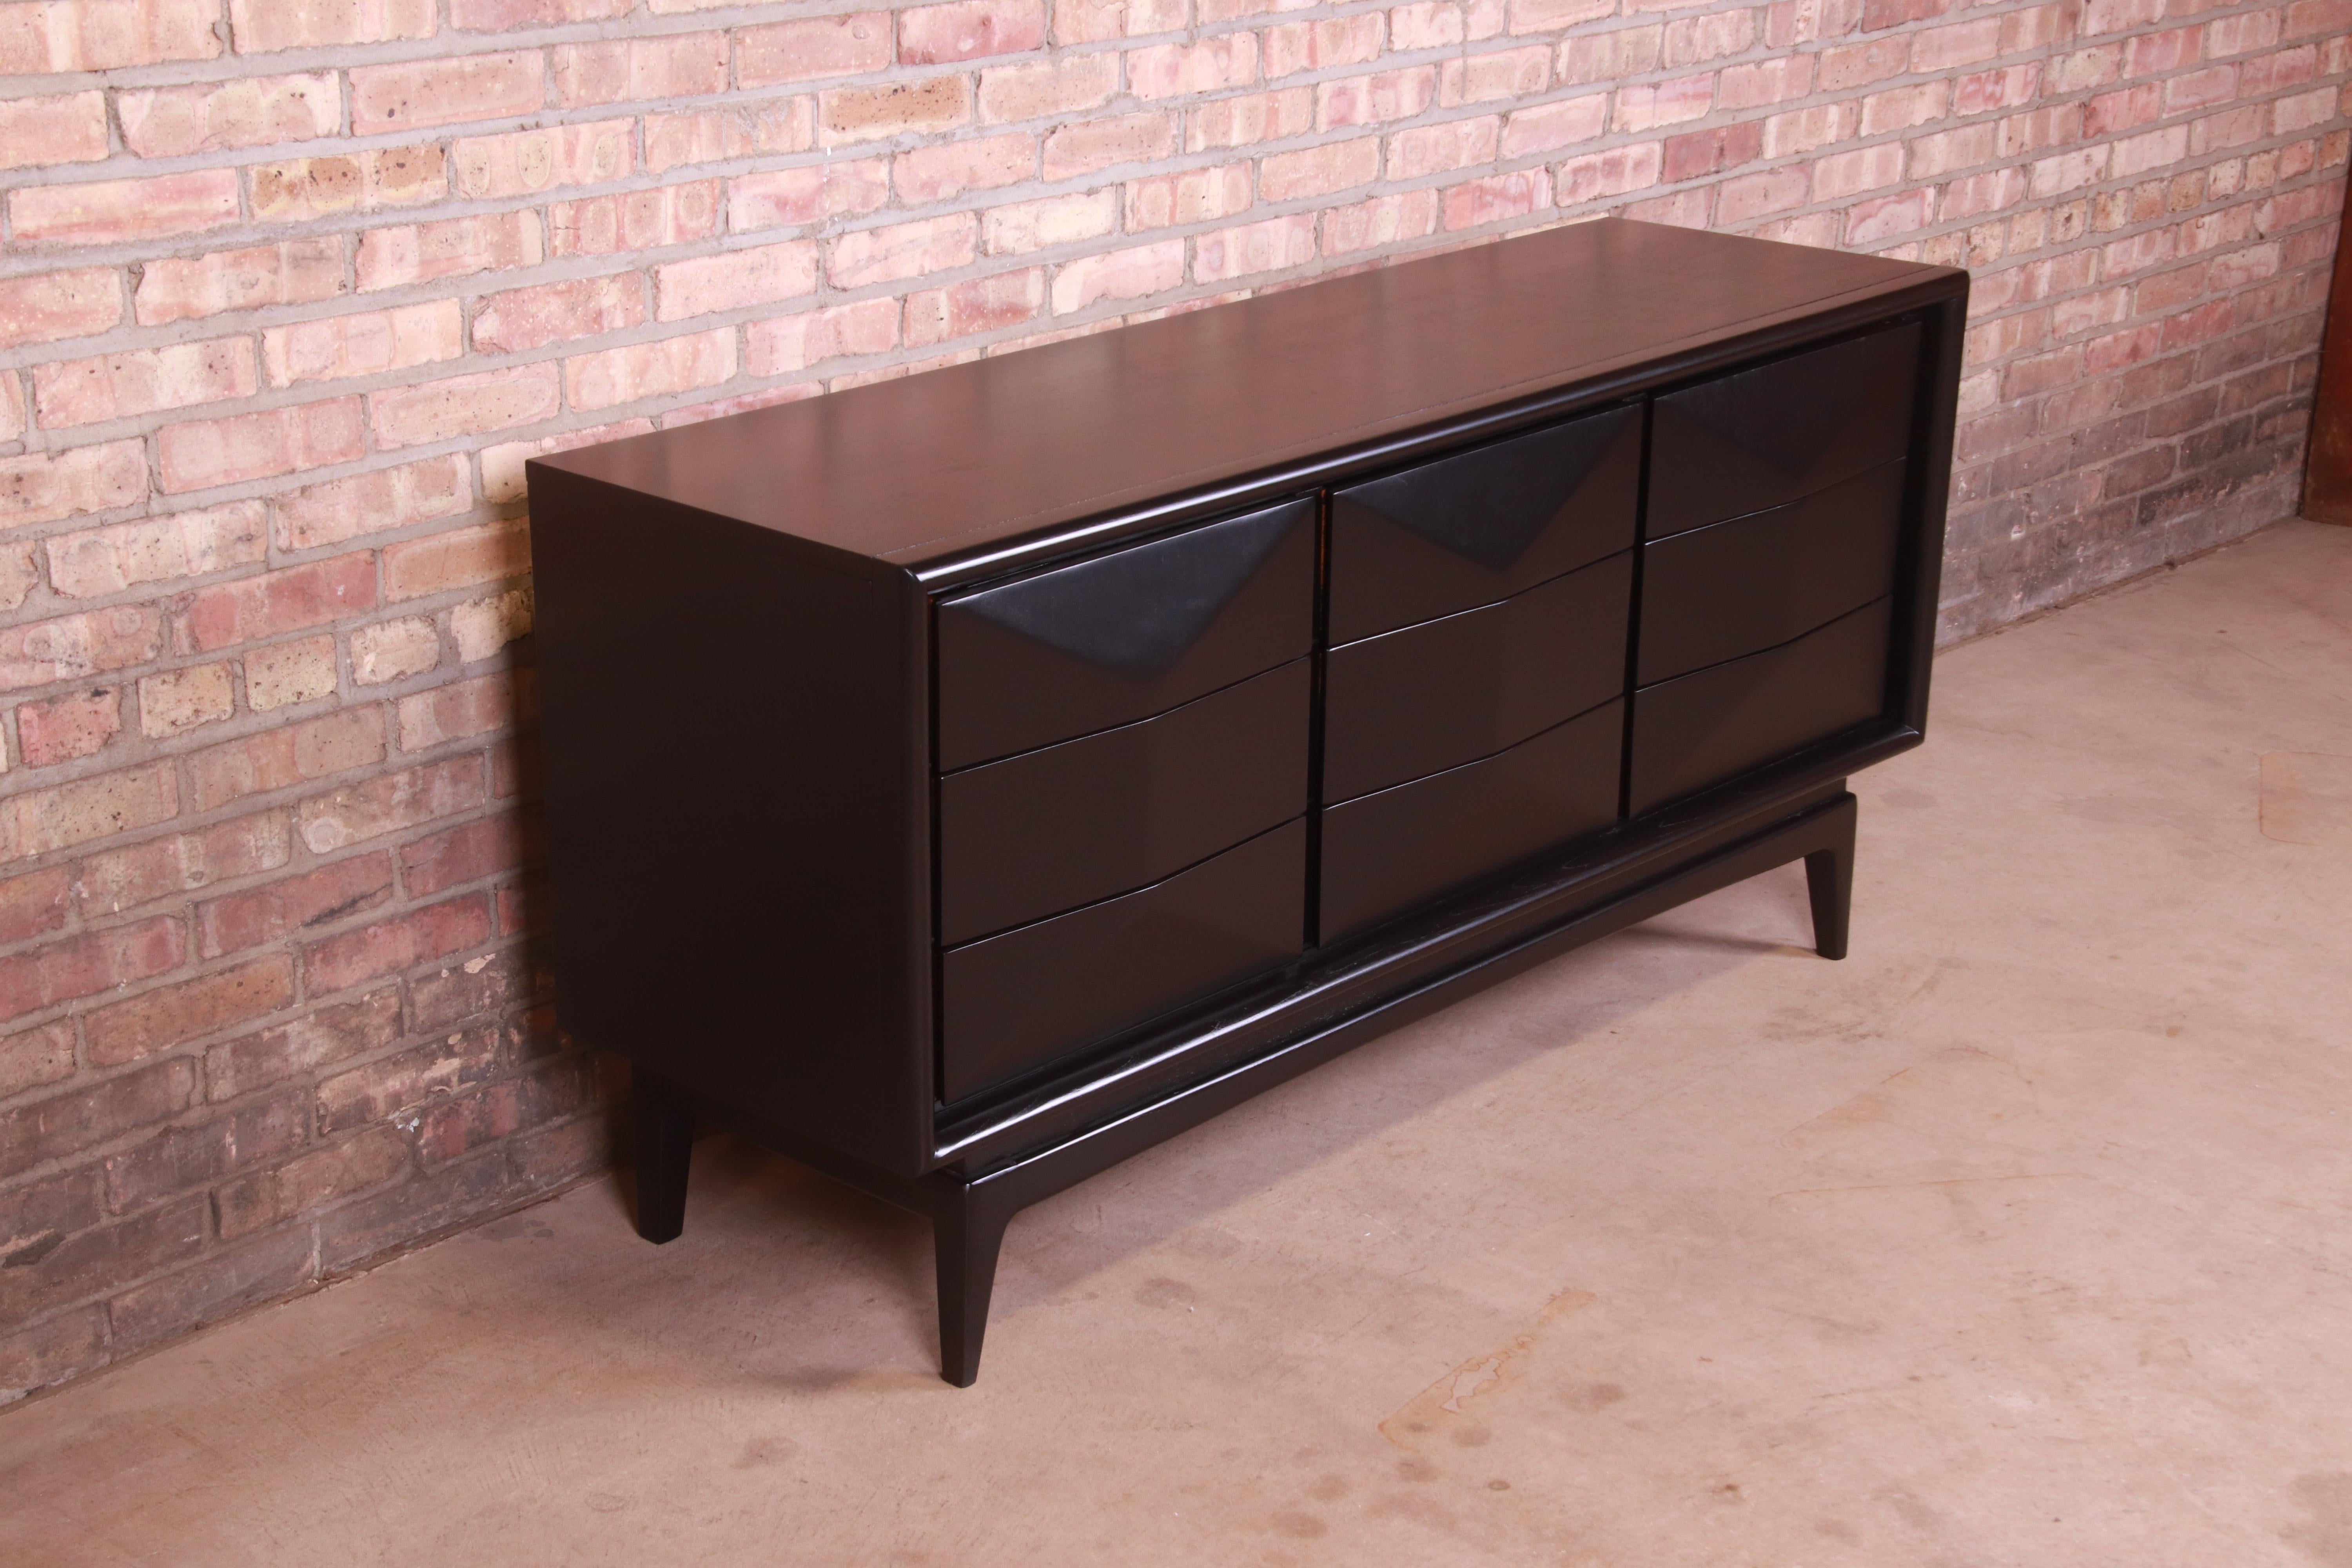 Walnut Mid-Century Modern Black Lacquered Diamond Front Dresser or Credenza by United